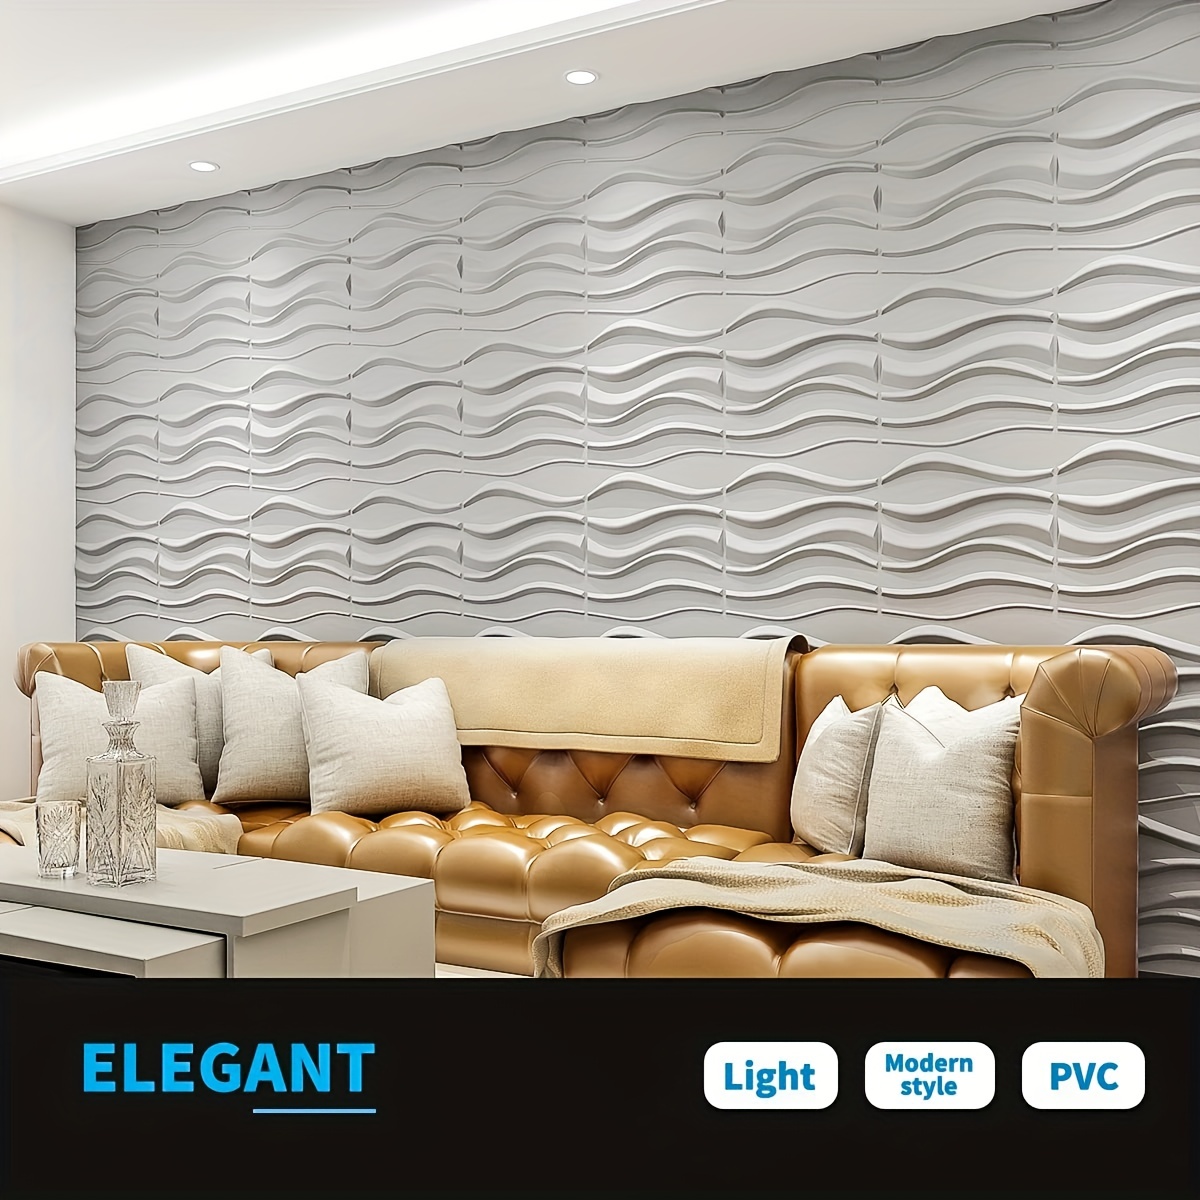 Enhance Your Space with Decorative Wall Panels